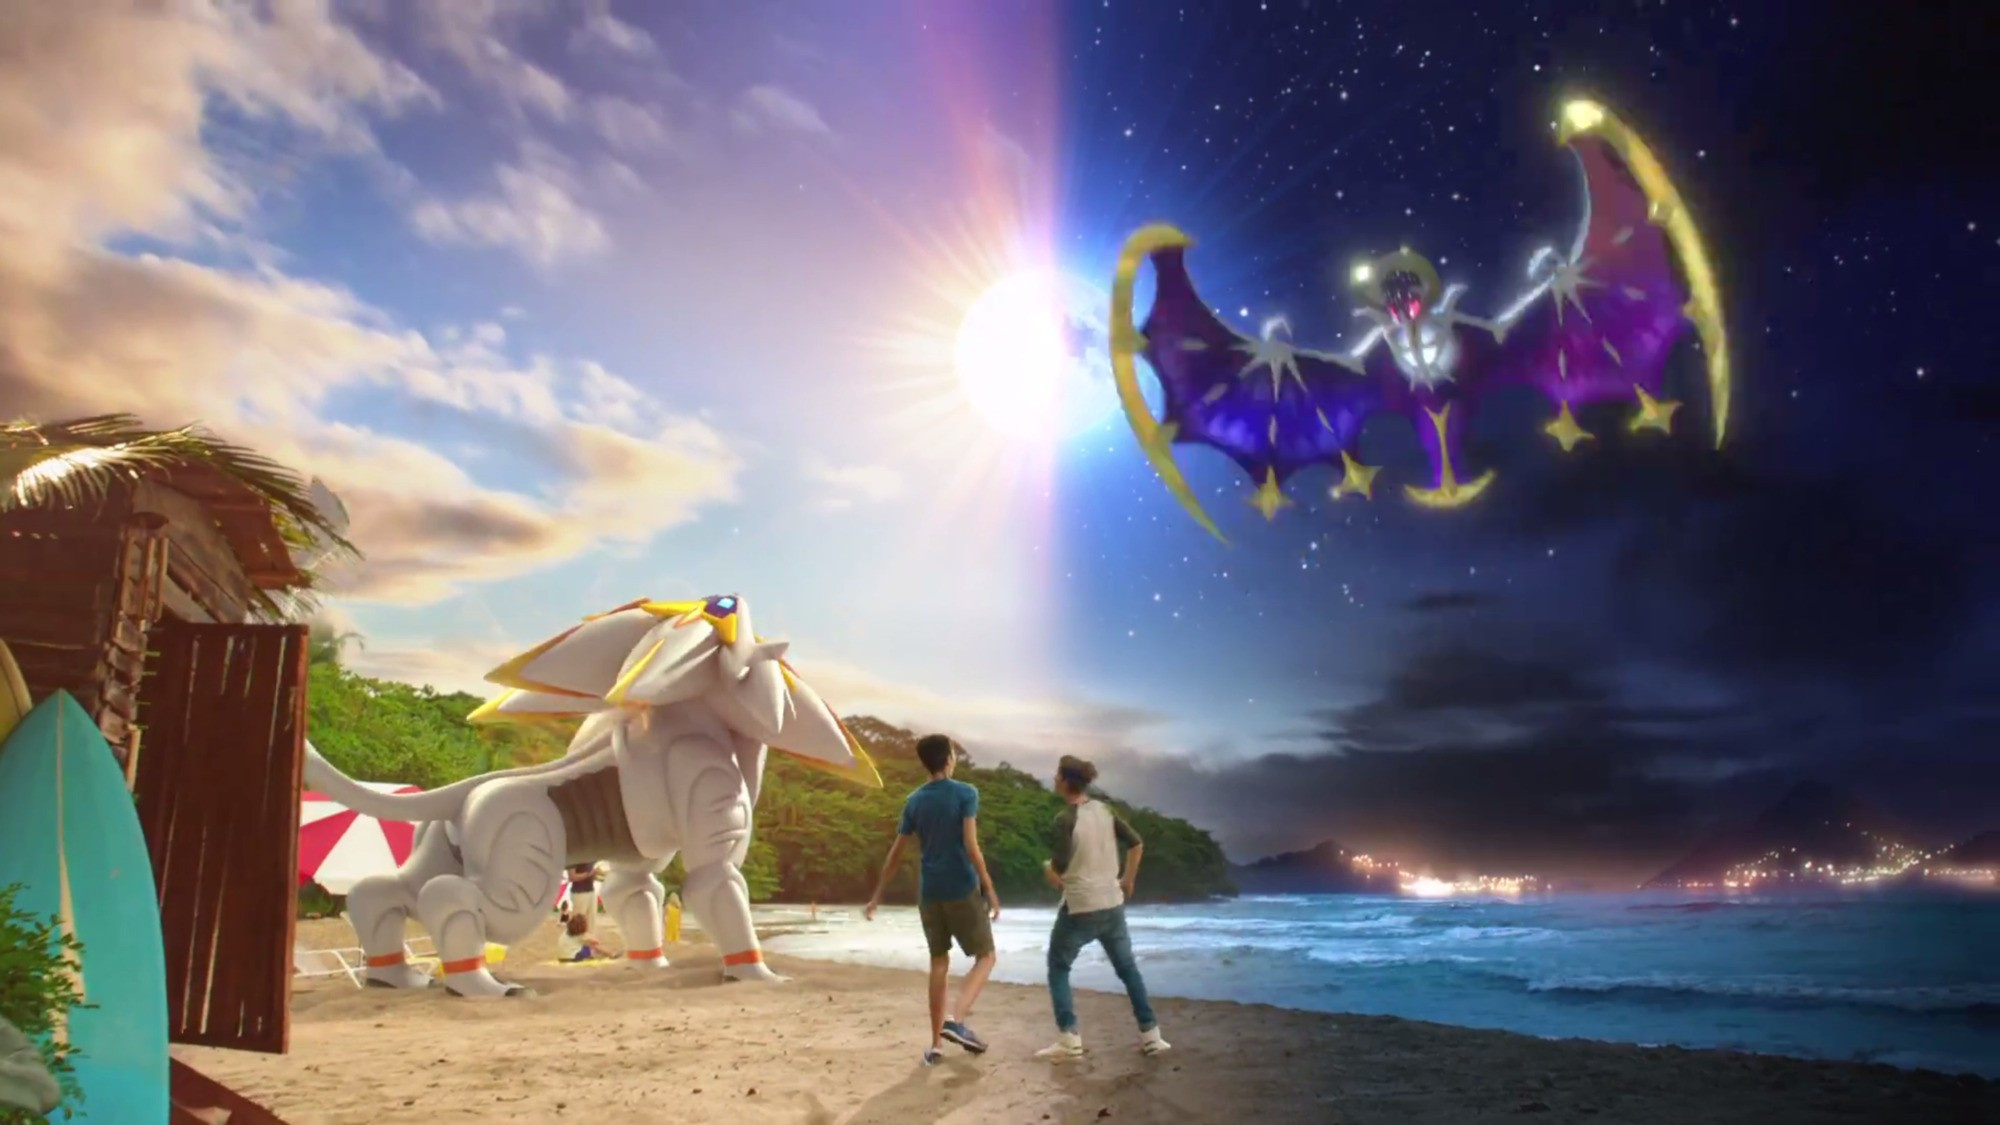 Video: Check Out the First North American Pokémon Sun and Moon Commercial - Nintendo Life3200 x 1800